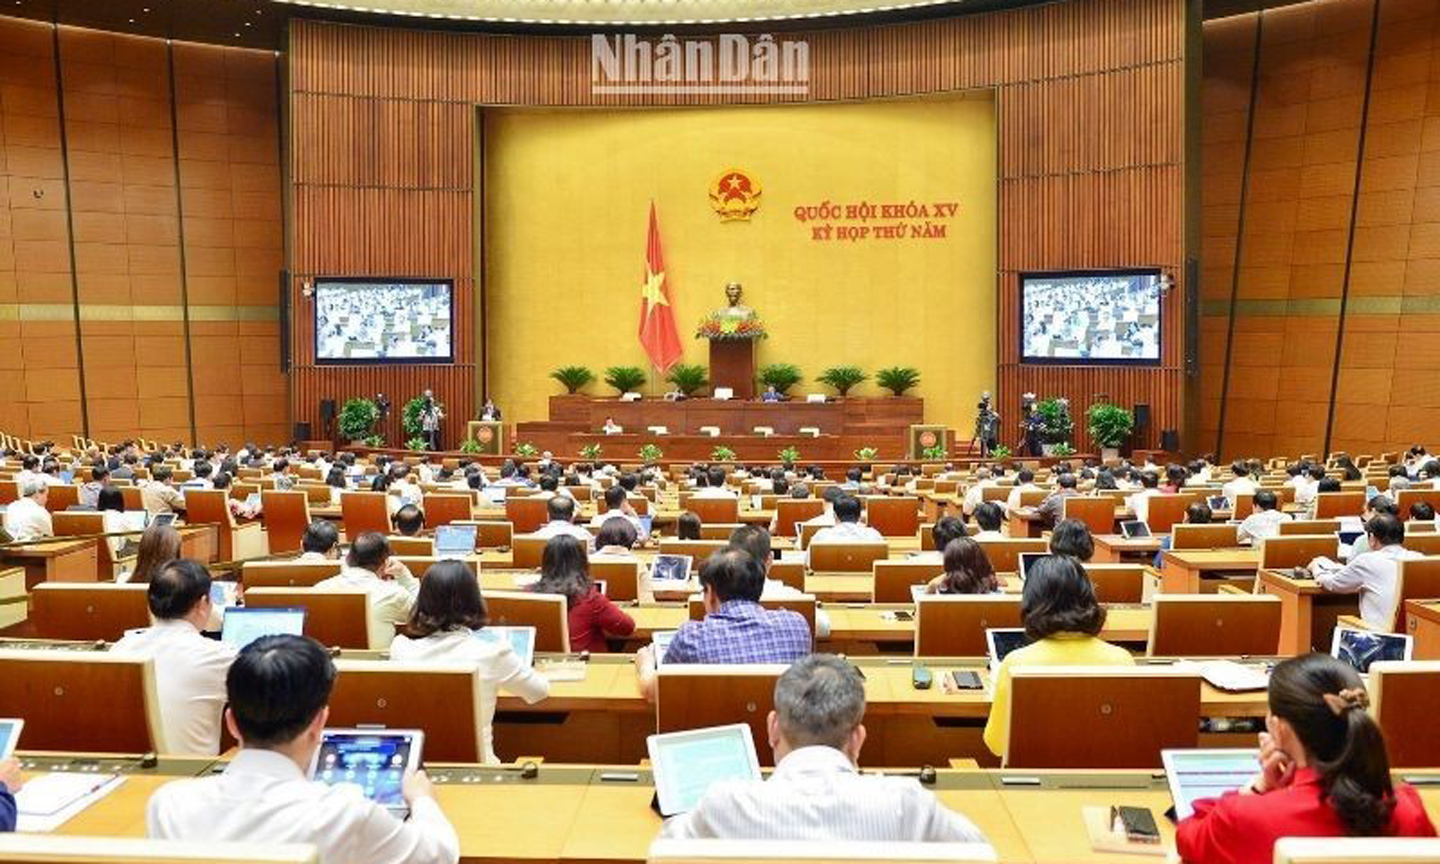  National Assembly deputies attend the working session on May 26 afternoon. (Photo: NDO/Duy Linh).